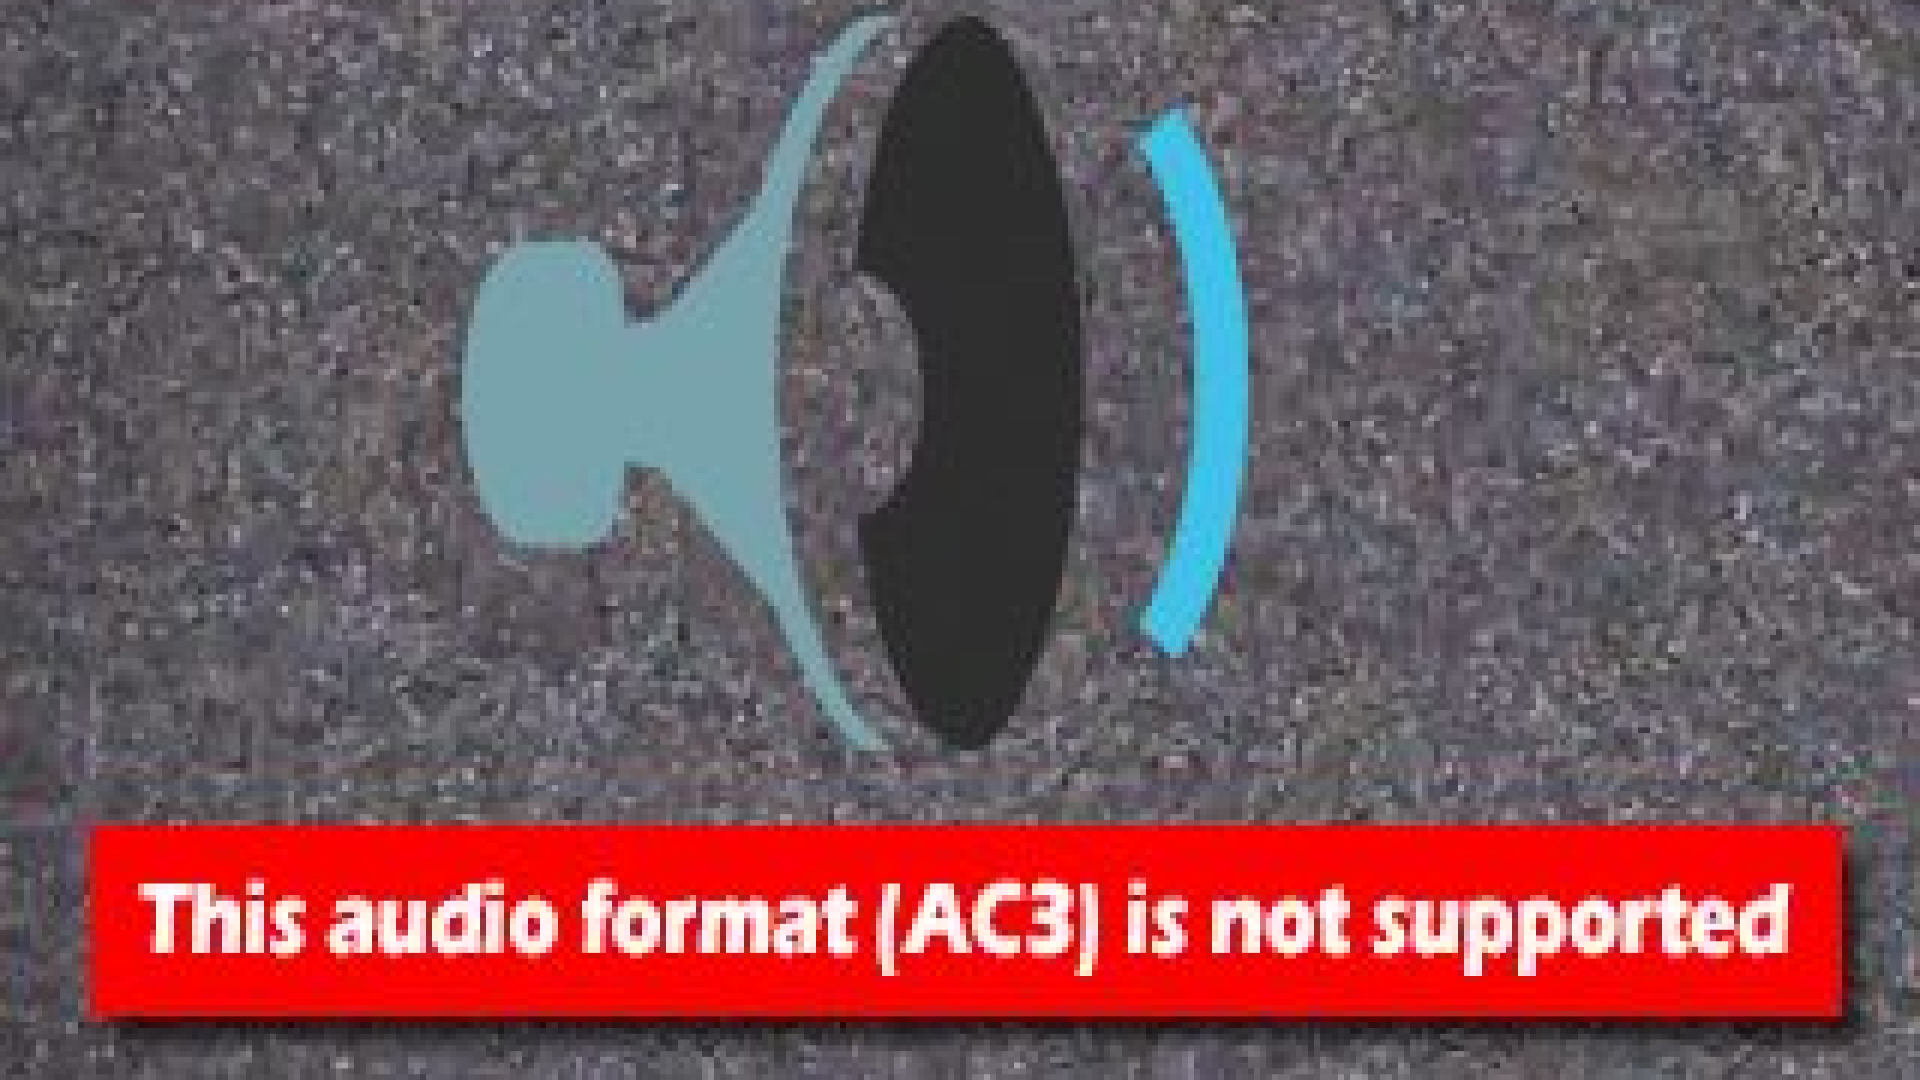 [Fixed!] How to Fix AC3 Audio Format Not Supported in TV?